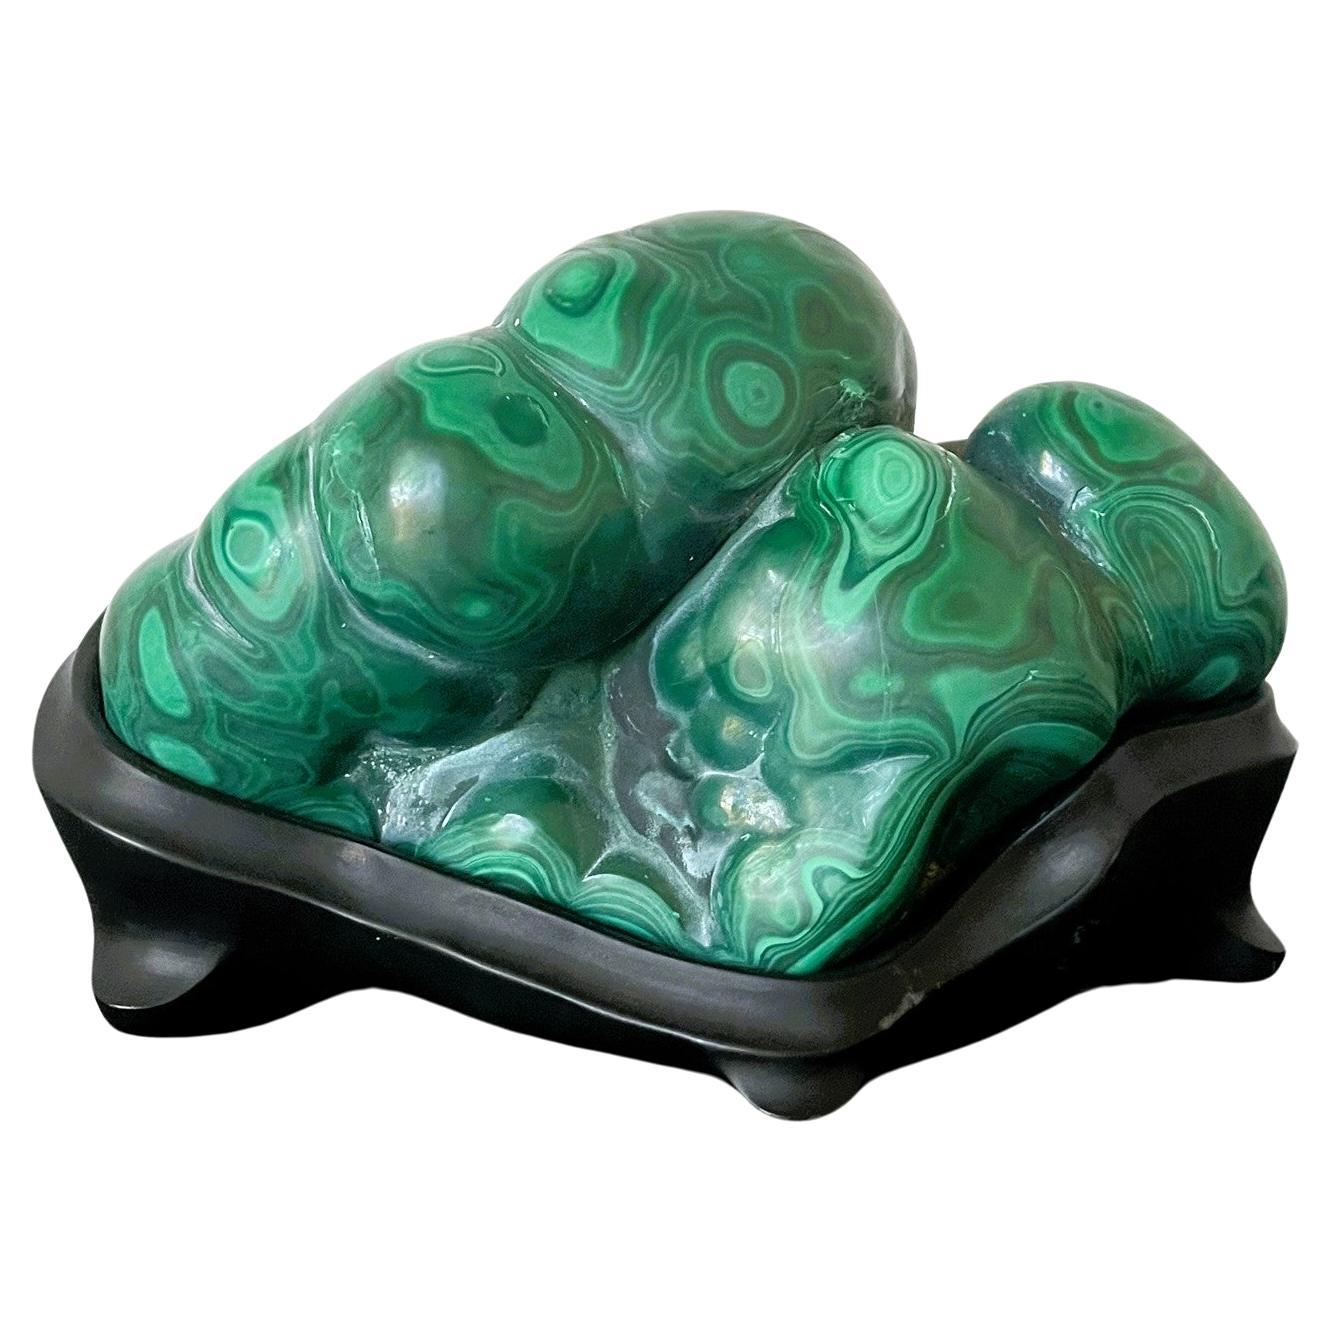 Malachite Rock on Display Stand as a Chinese Scholar Stone For Sale